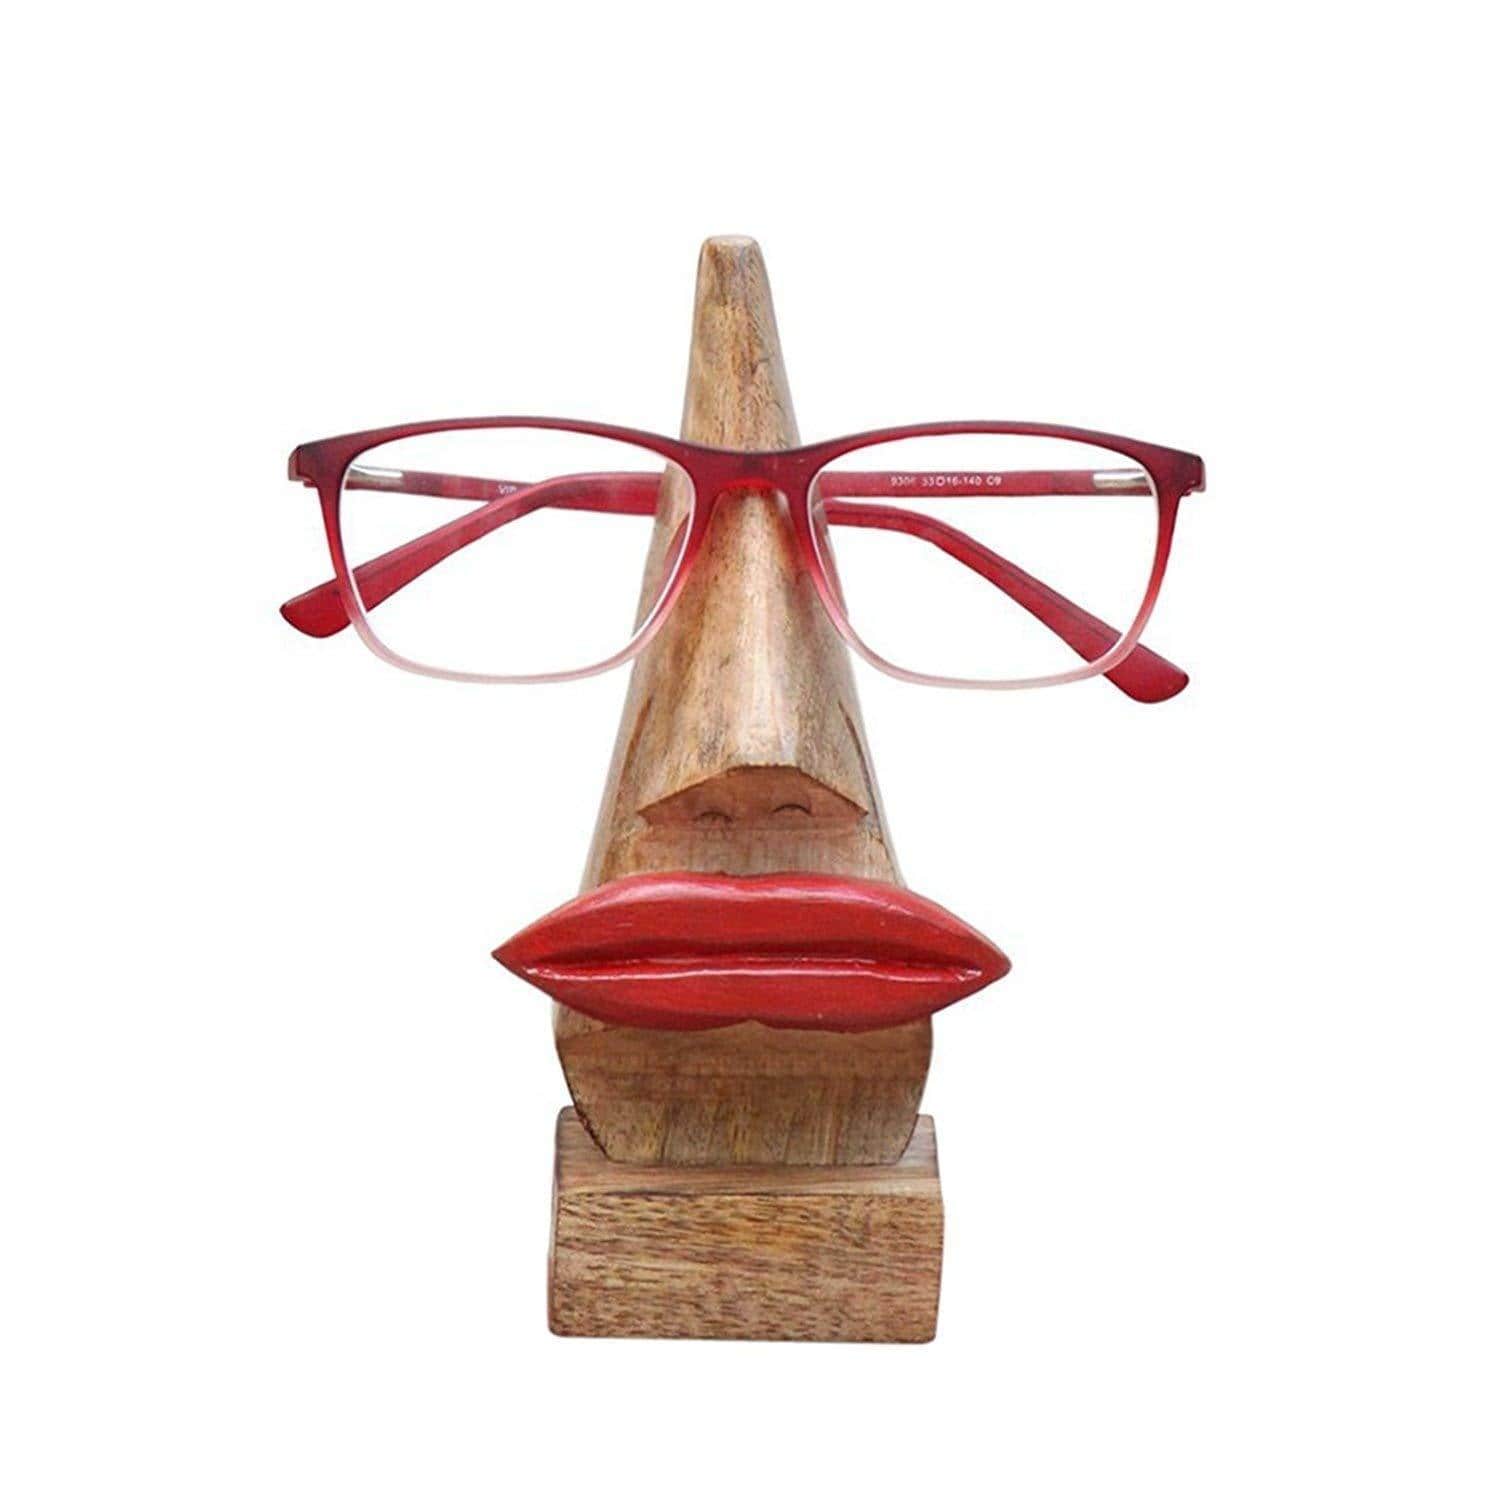 Wooden Nose Shaped Eyeglass Spectacle Holder